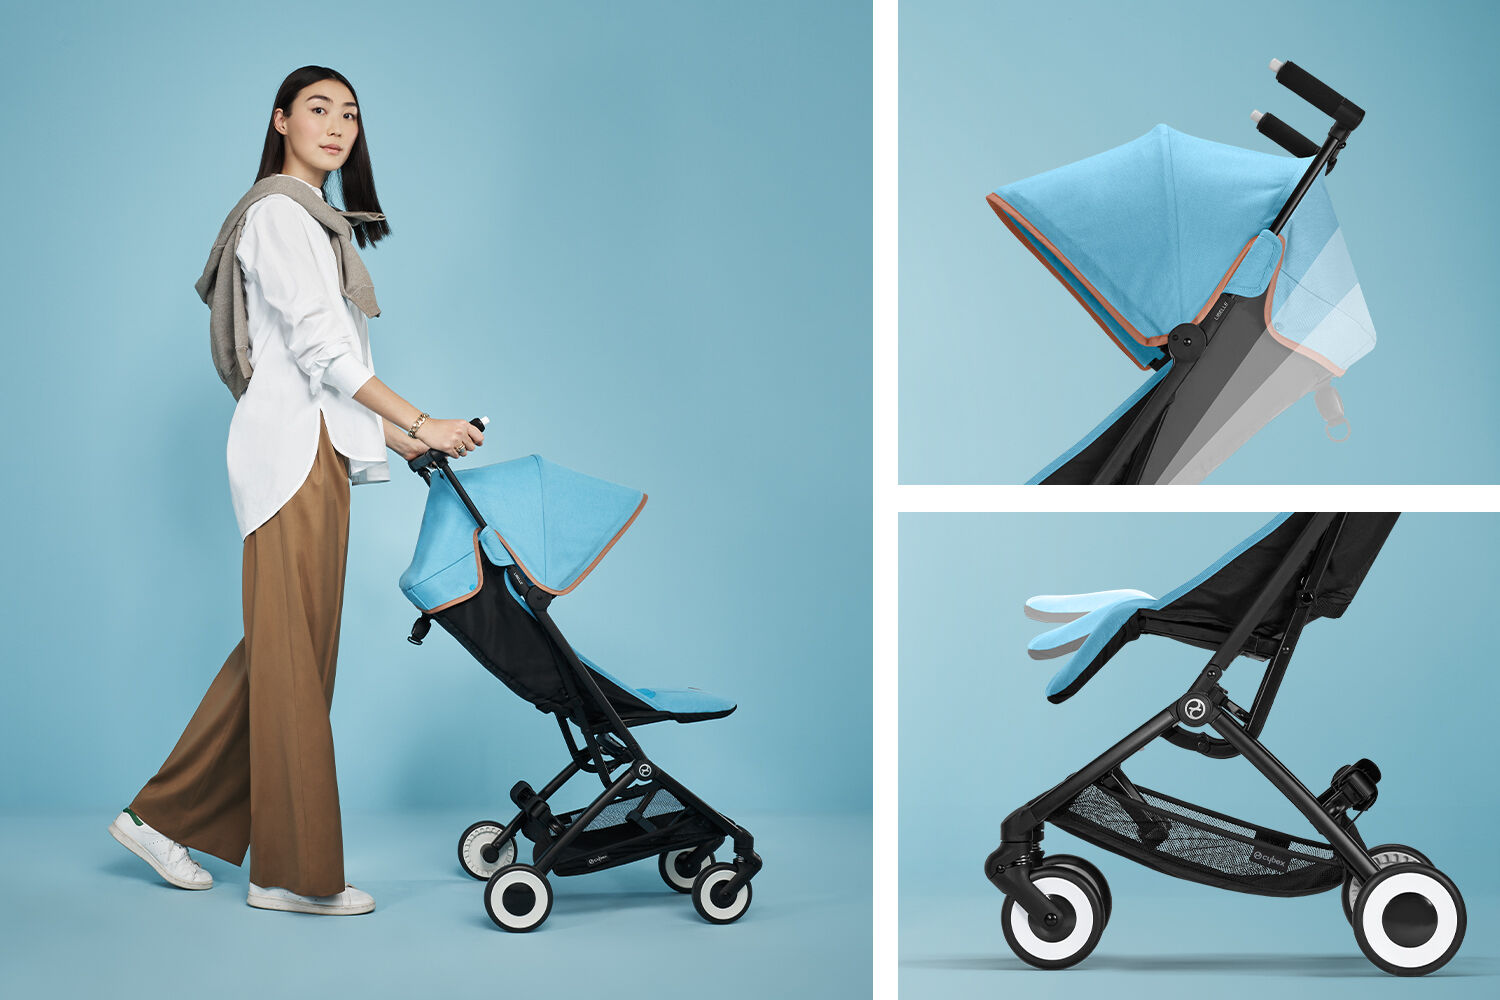 CYBEX Libelle – the Lightweight Stroller from CYBEX that Makes